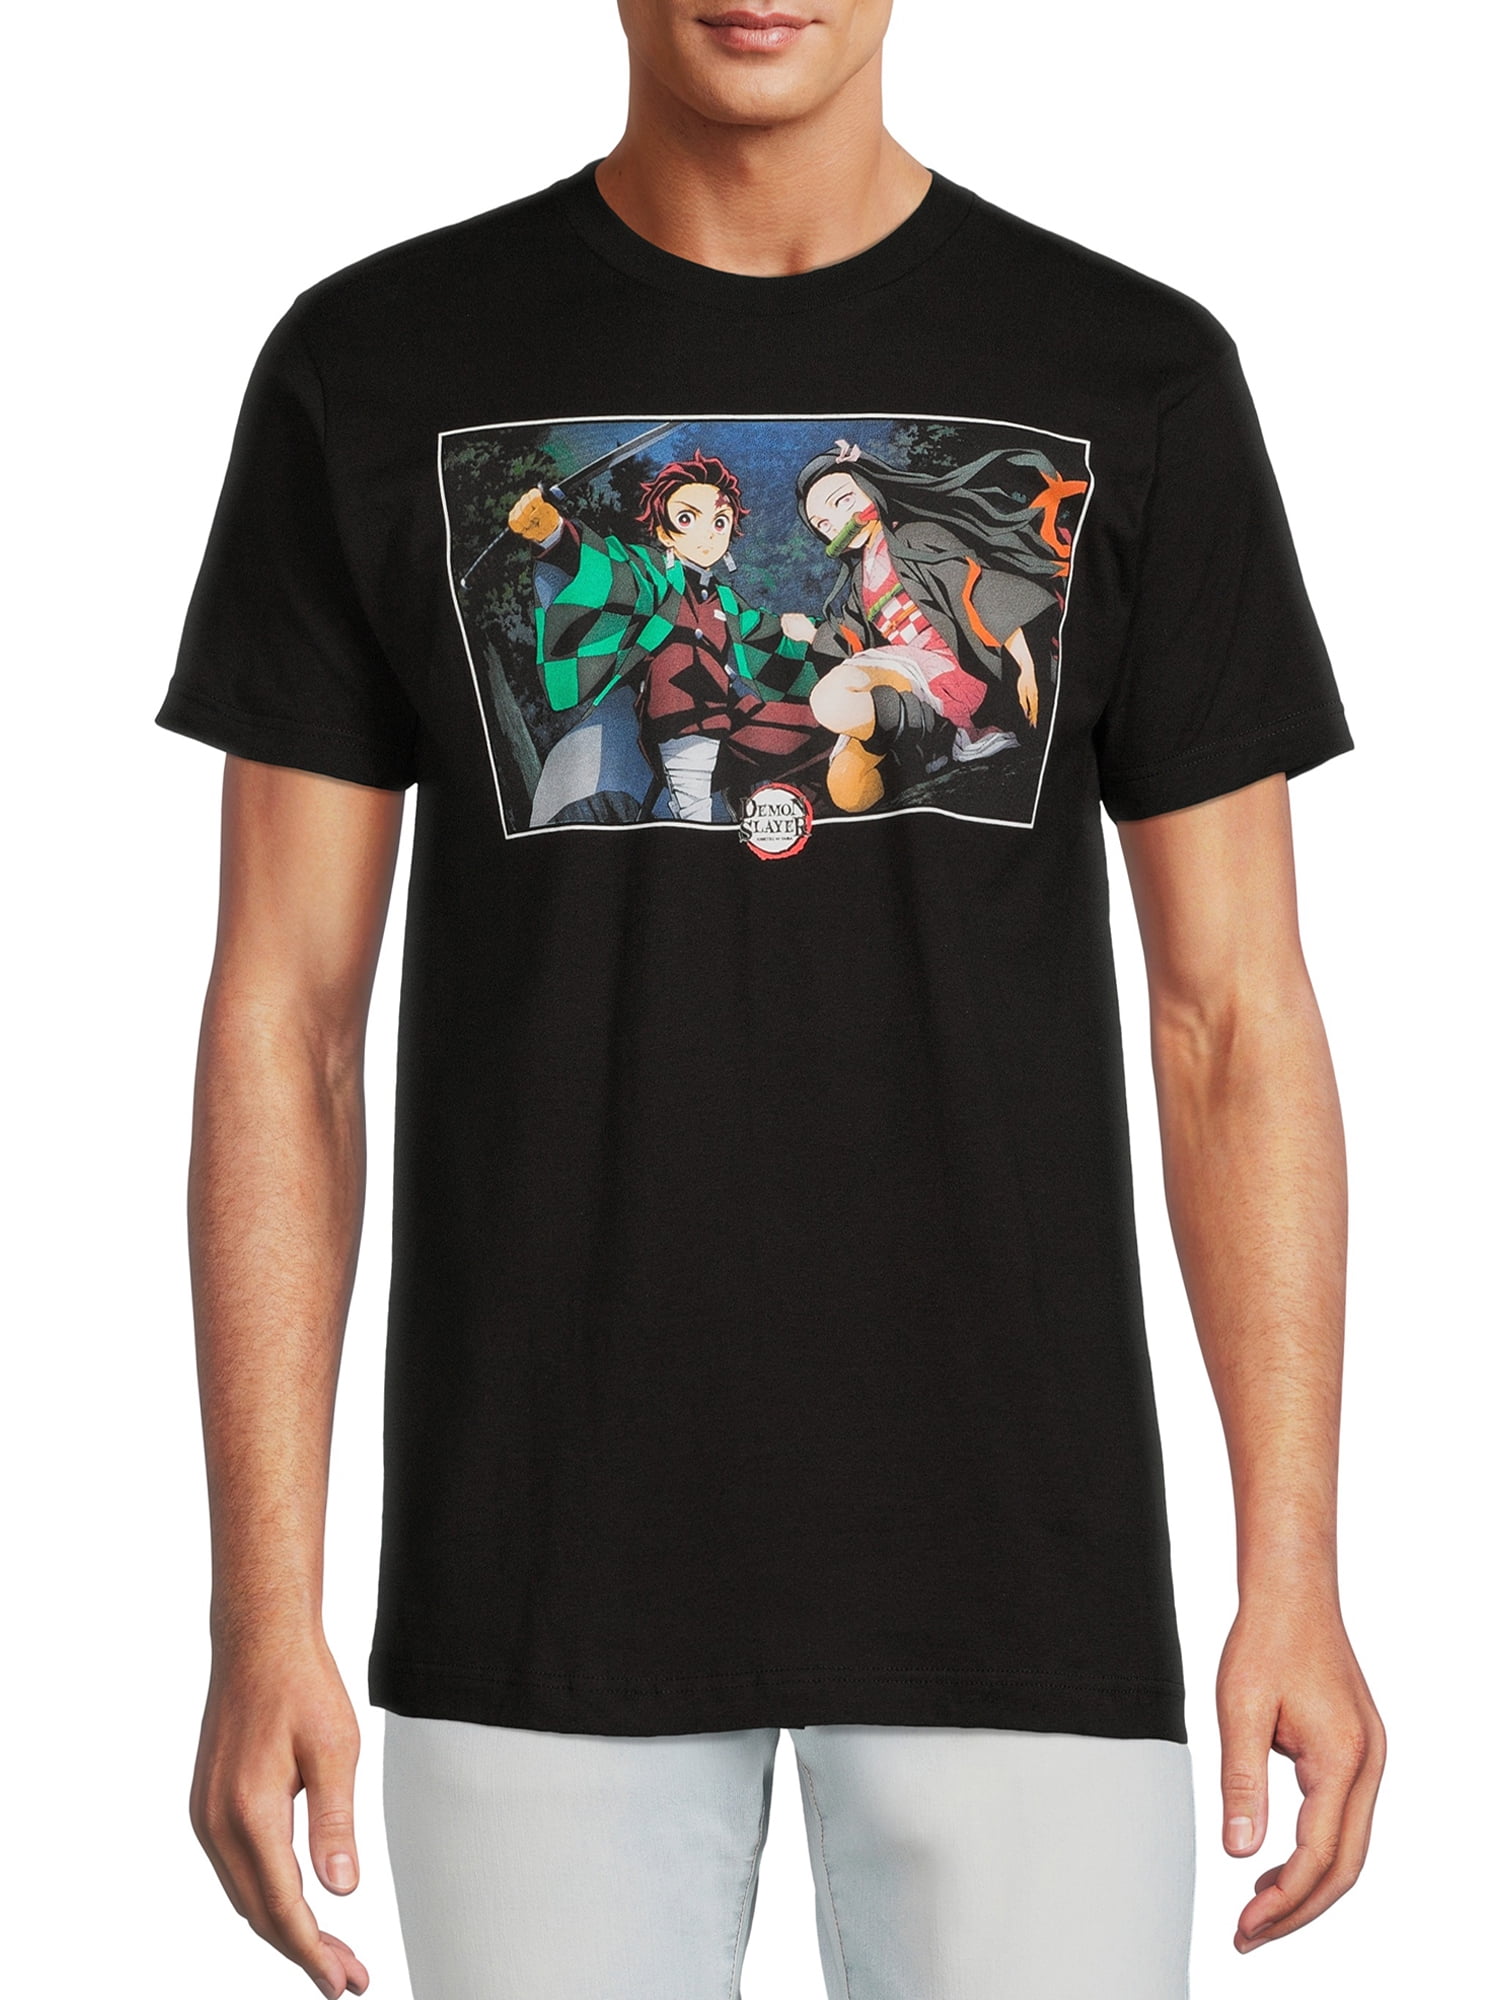 Demon Slayer Men's Graphic Tee with Short Sleeves